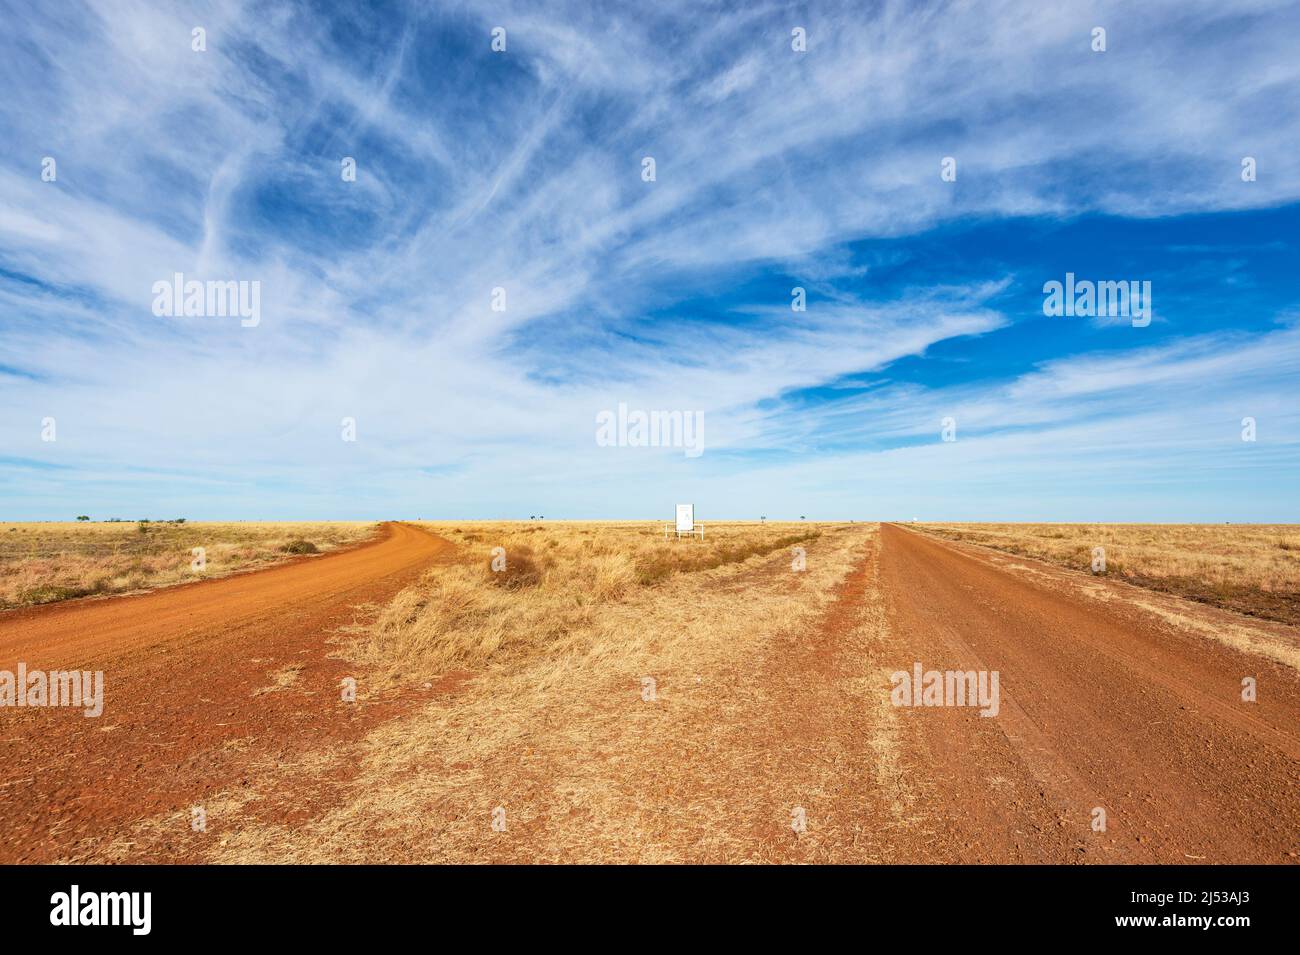 Gravel roads through the remote barren plains of the historic Barkly Stock Route, Barkly Tablelands, Northern Territory, NT, Australia Stock Photo